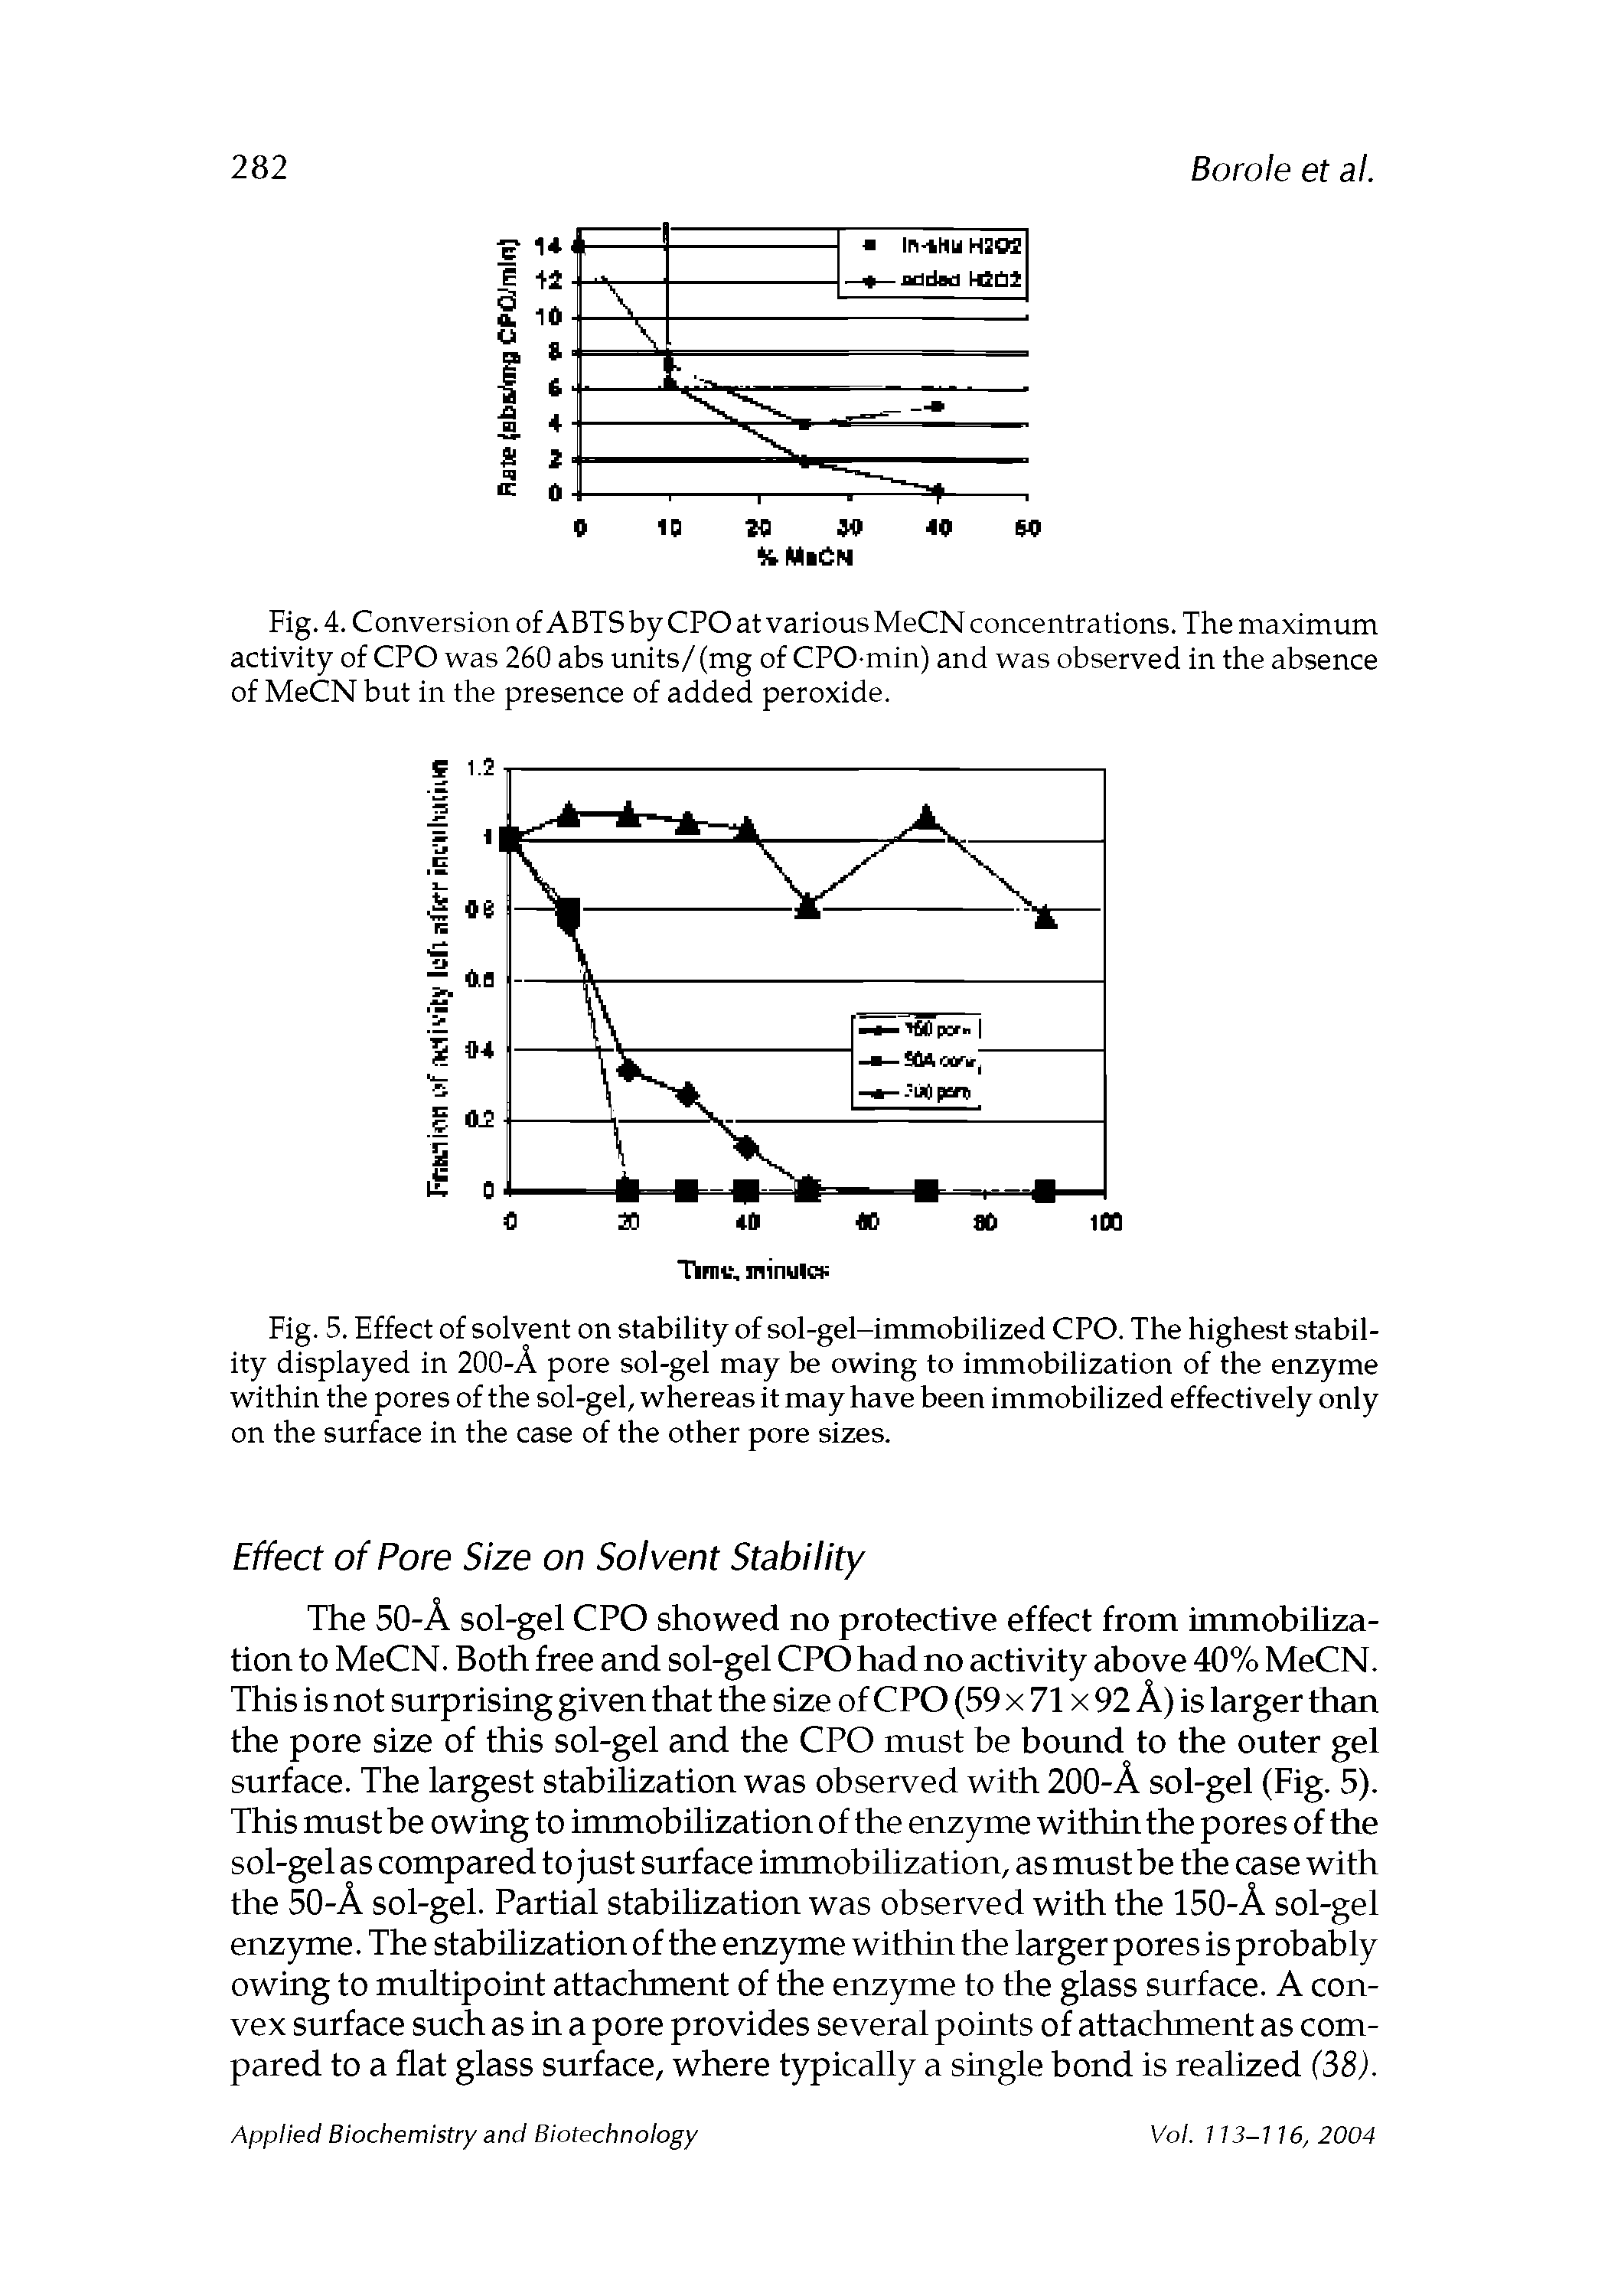 Fig. 5. Effect of solvent on stability of sol-gel-immobilized CPO. The highest stability displayed in 200-A pore sol-gel may be owing to immobilization of the enzyme within the pores of the sol-gel, whereas it may have been immobilized effectively only on the surface in the case of the other pore sizes.